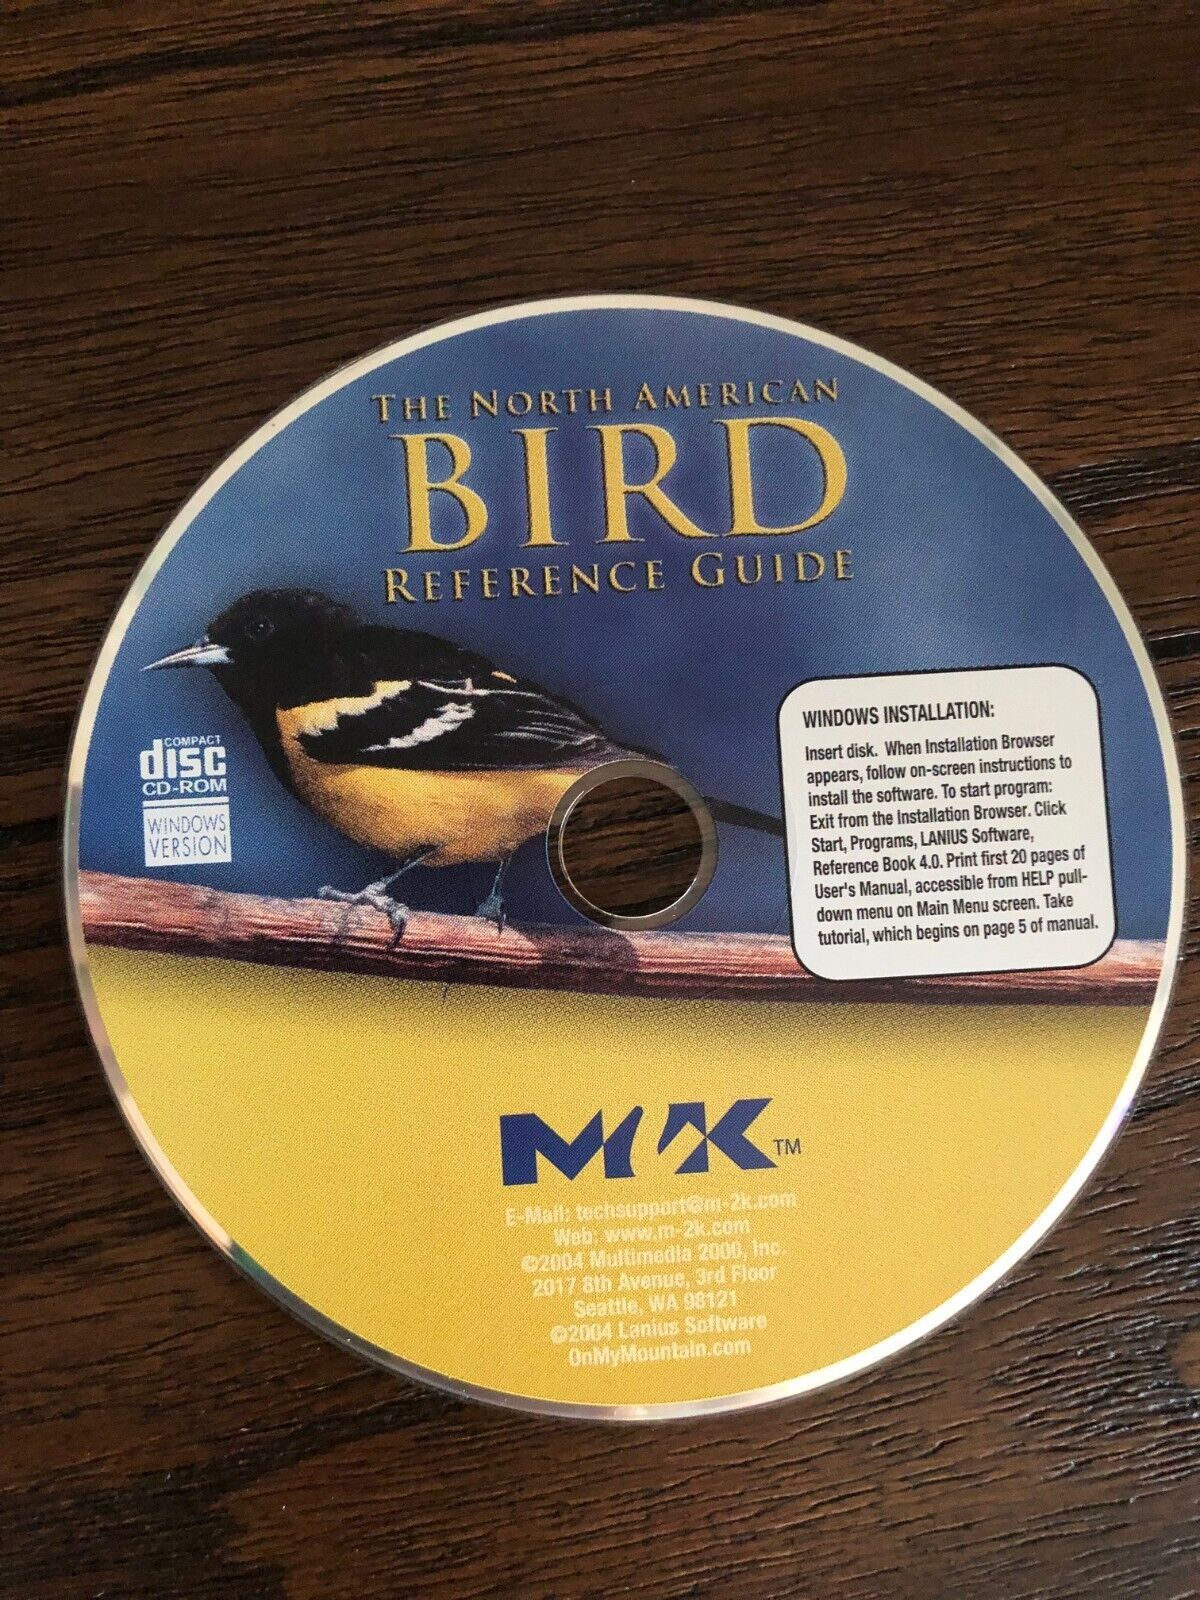 The North American Bird reference guide : vintage PC software CD